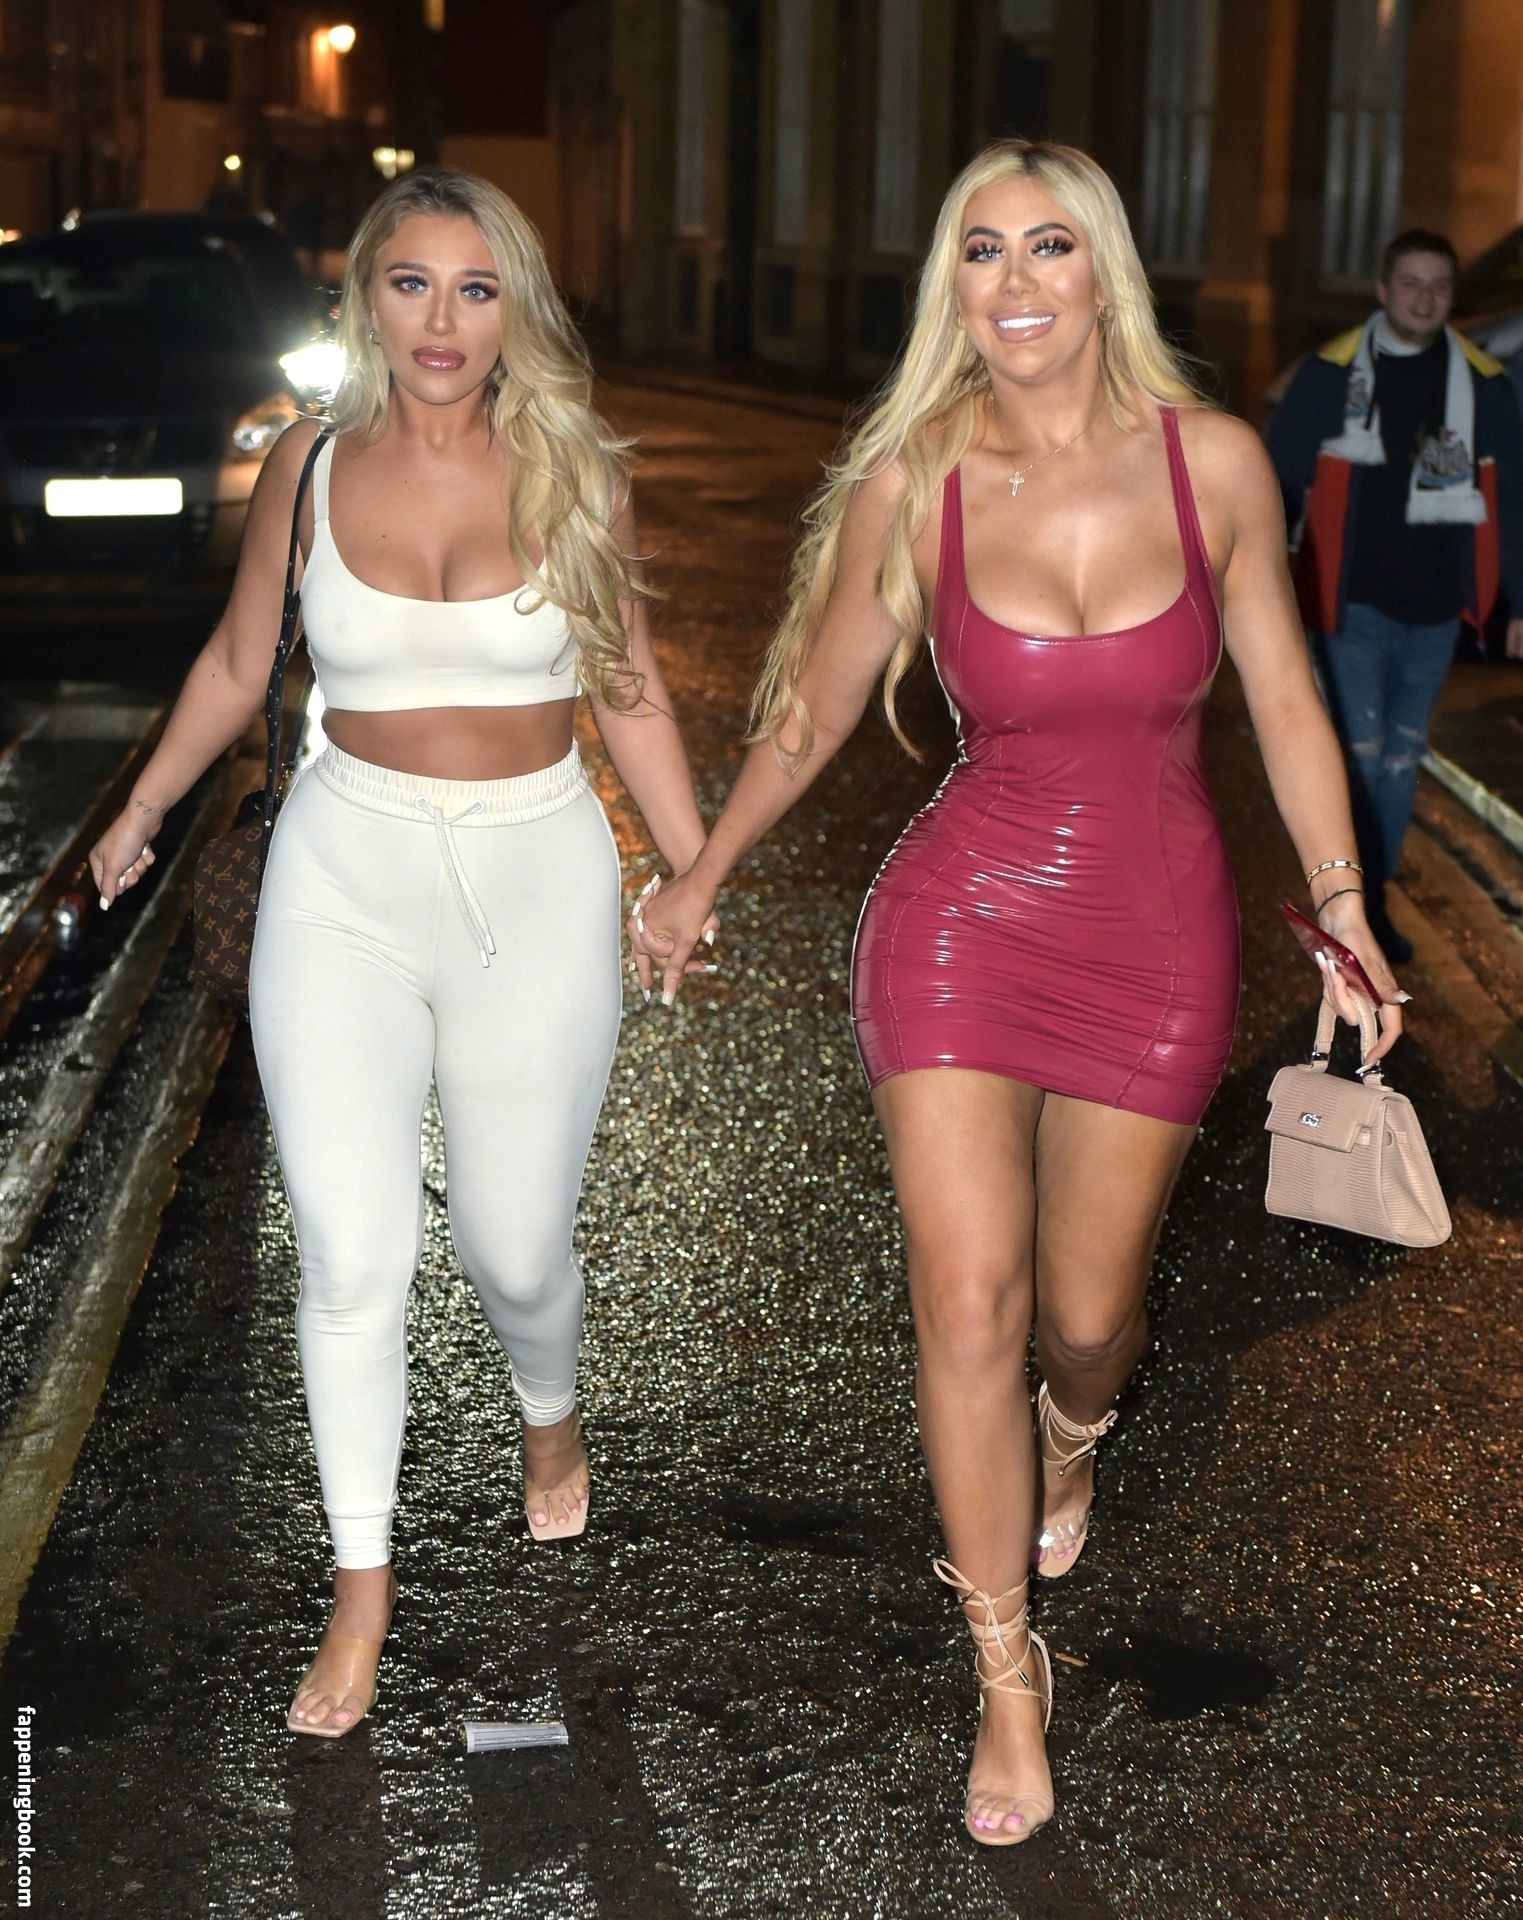 Chloe Ferry See-Through - The Fappening Leaked Photos 2015 